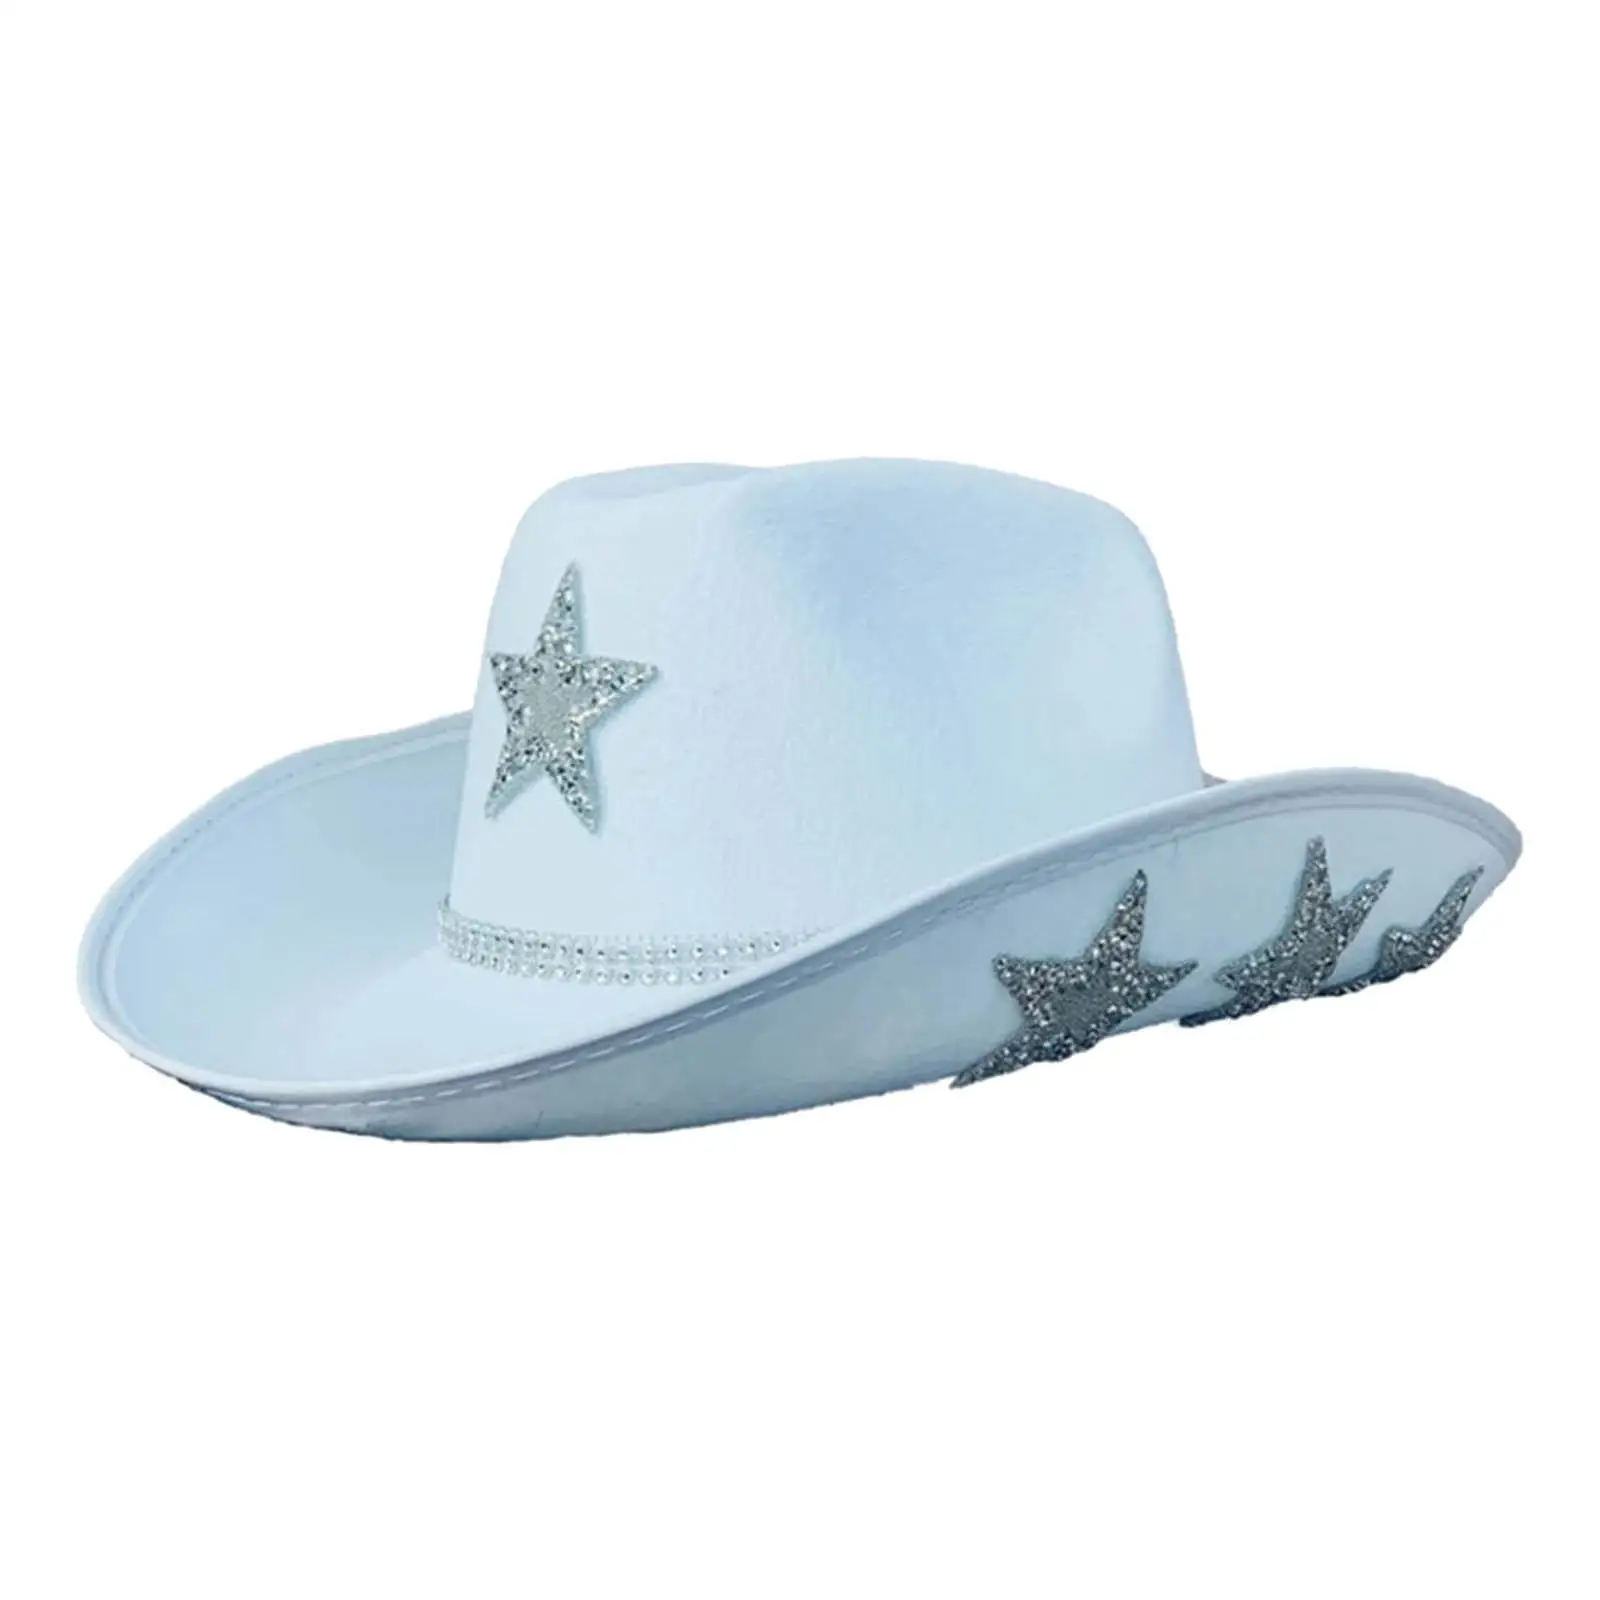 Wild West Western Style Cowgirl Hat Sun Hats Wedding Novelty Cowboy Hat for Adult Teens Women Holiday Dress up Summer Outdoor